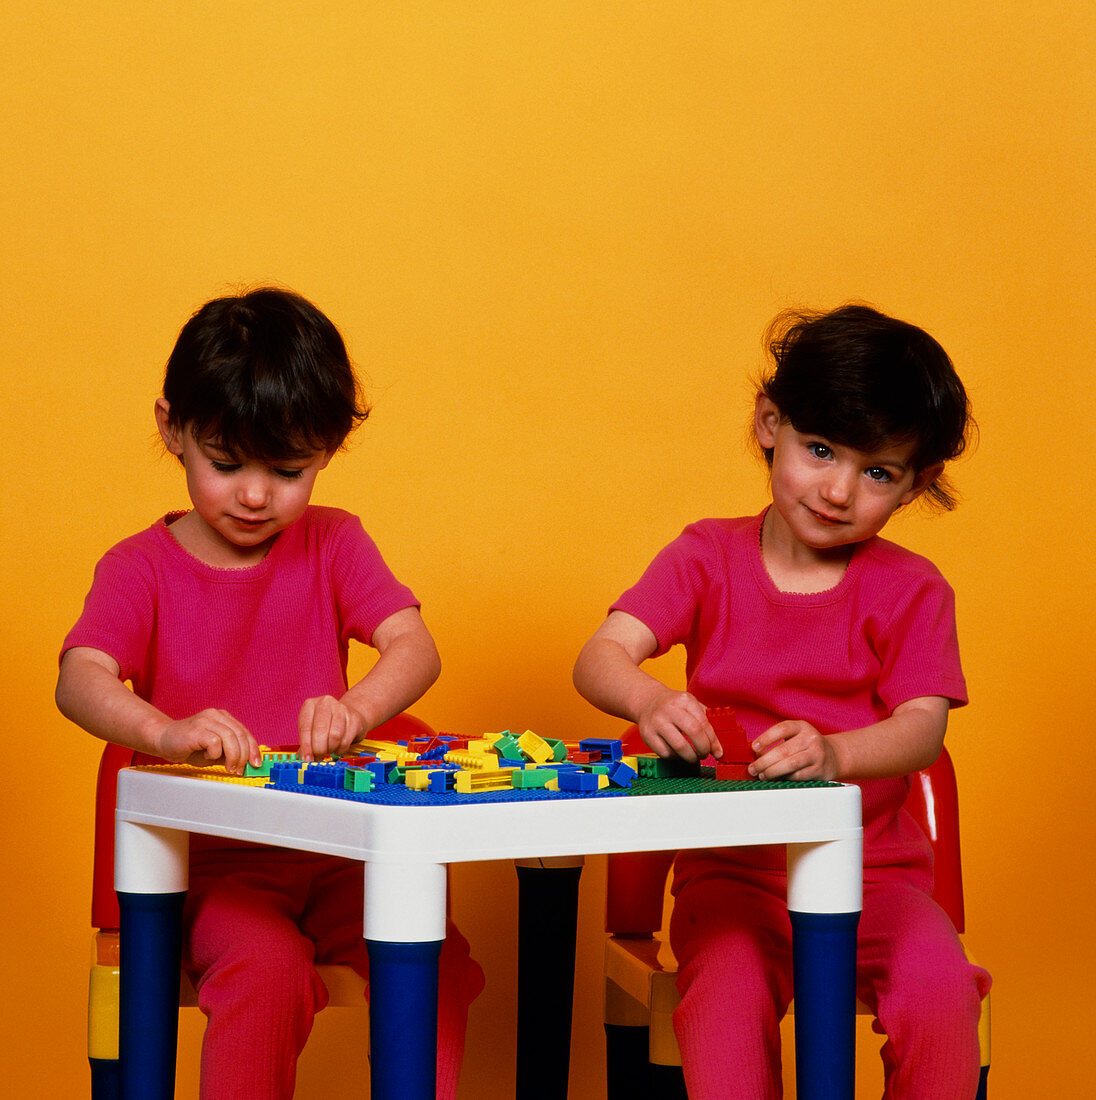 Identical twin girls aged 3 years playing